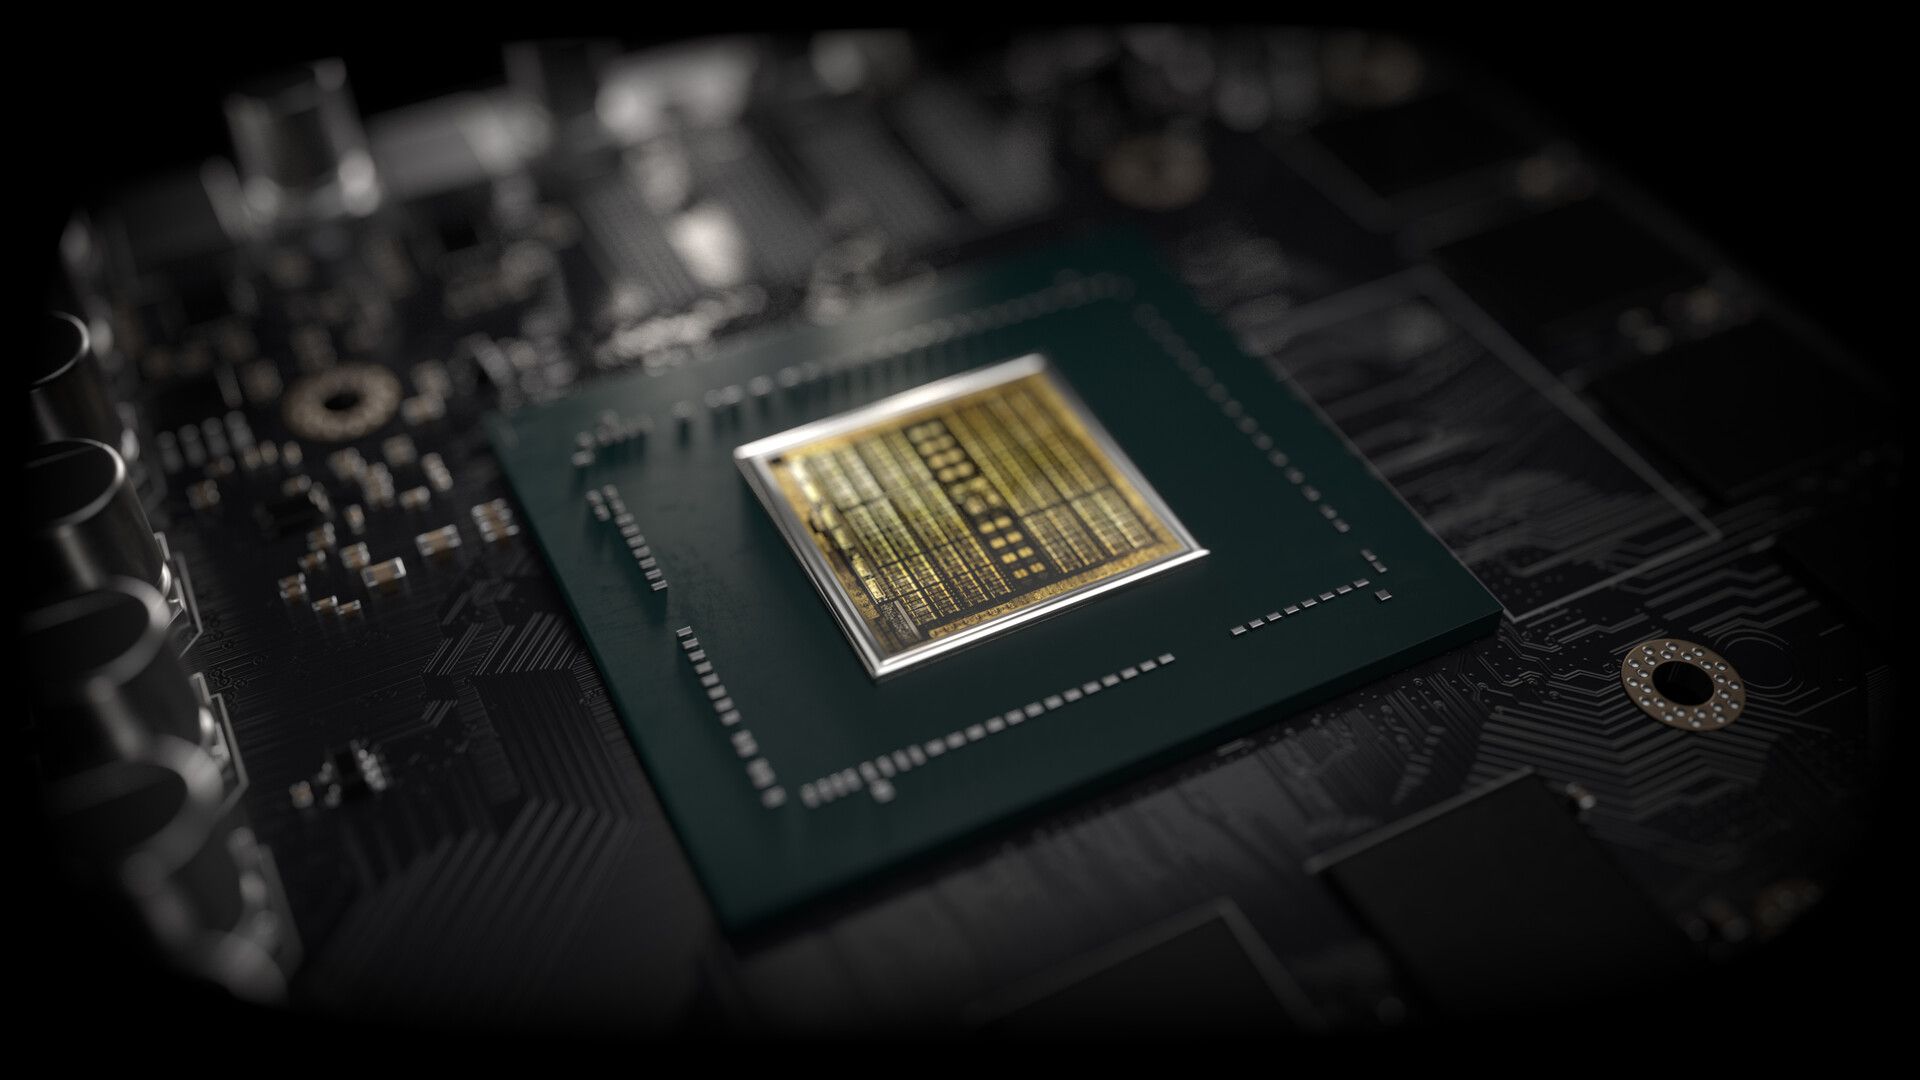 Exclusive First Benchmarks Of NVIDIA RTX 2070 Super Mobile Show Appreciable Gains Over The RTX 2070 Mobile, New RTX 2060 Mobile Leads The RTX 2070 Max Q.net News